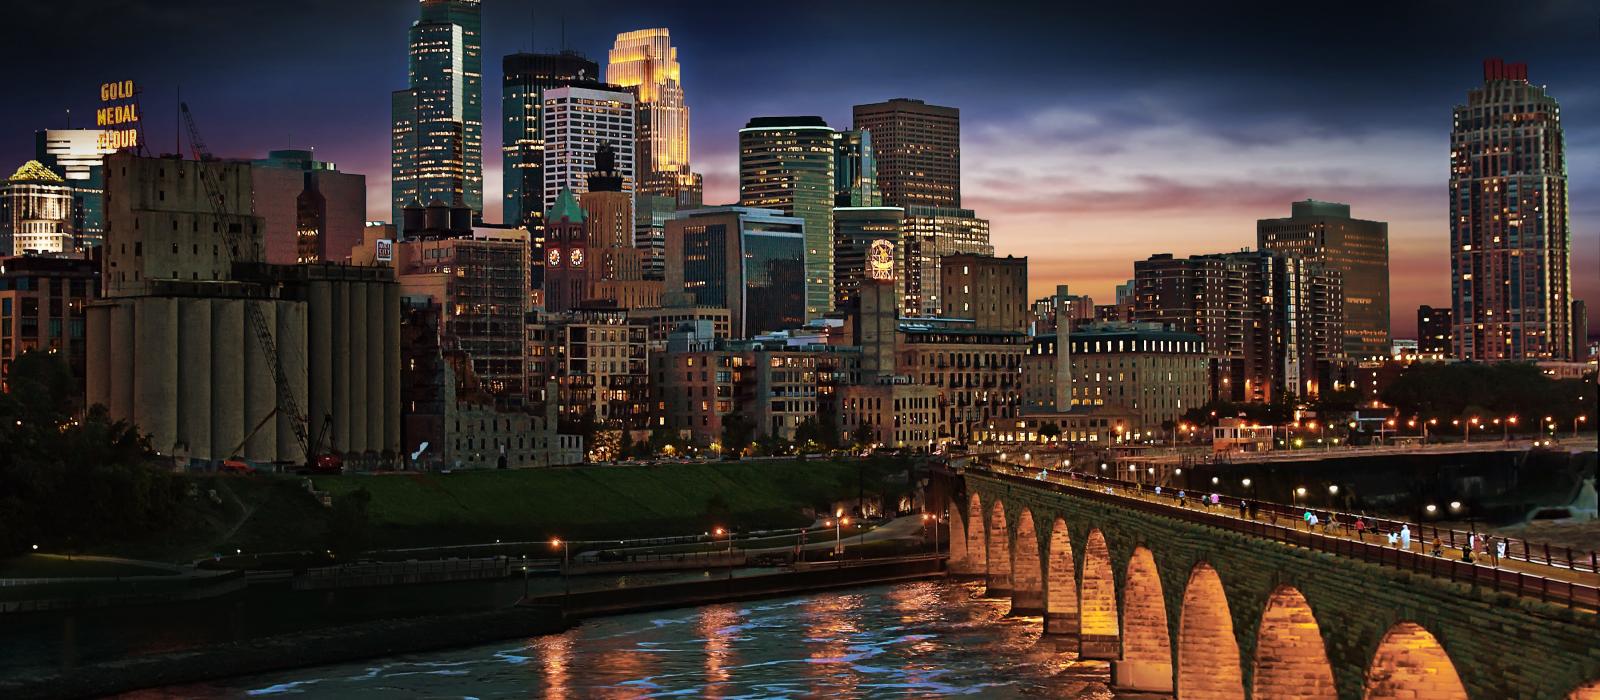 Top 20 Best Cities to Live in the USA - Minneapolis, Minnesota